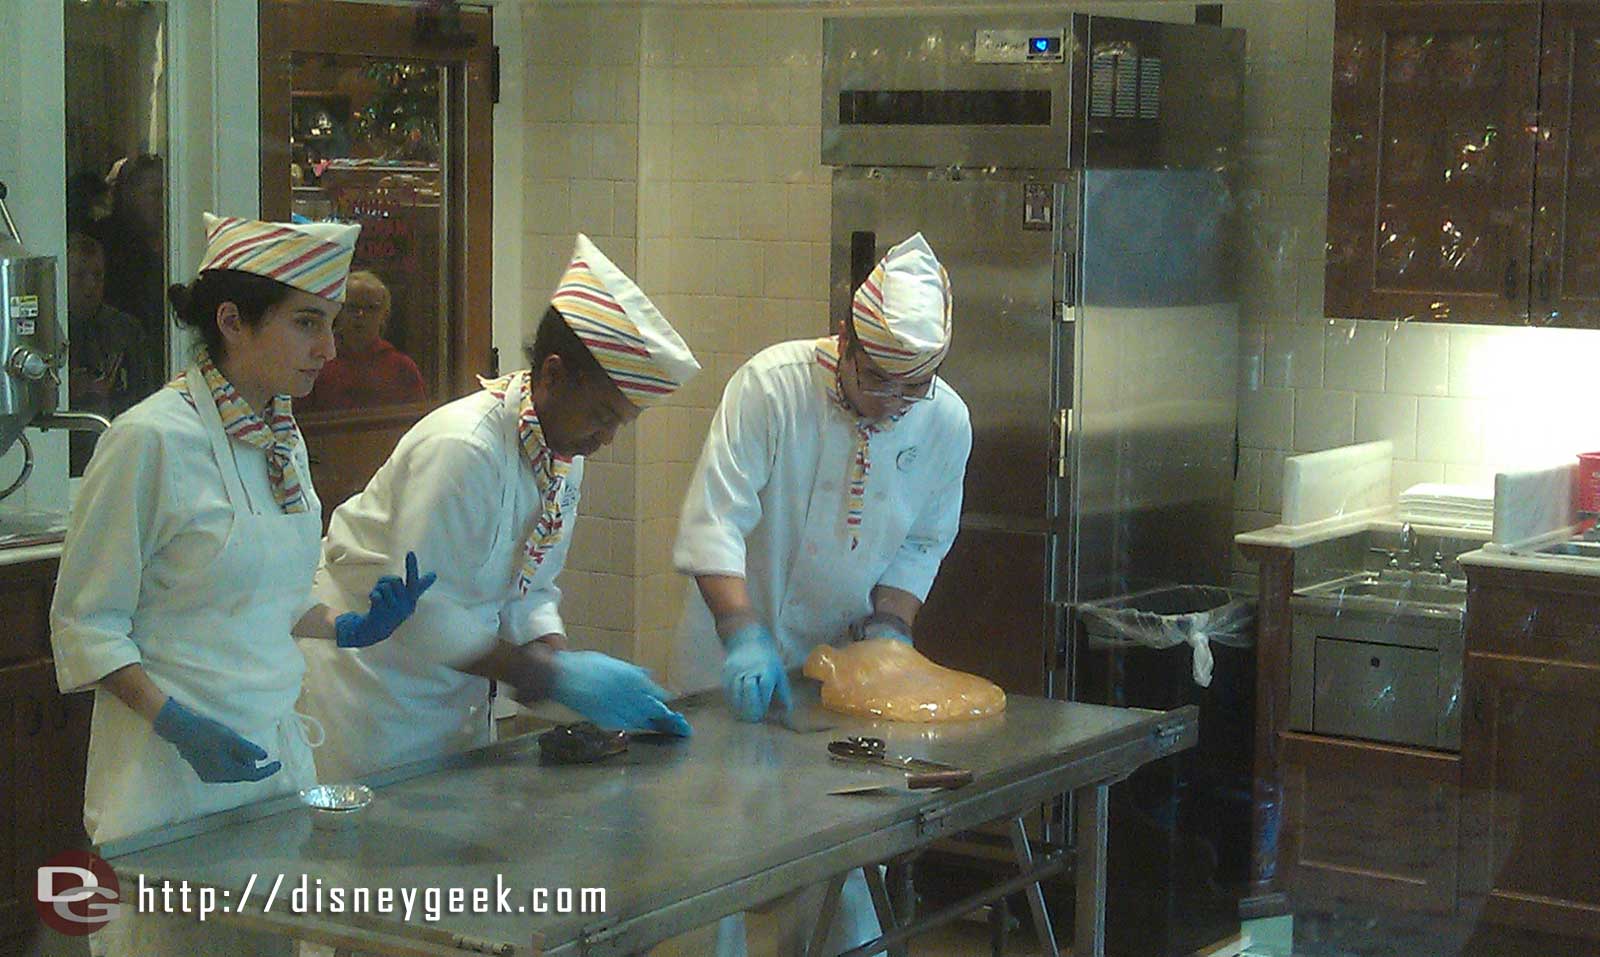 Candy Canes being made on BuenaVistaStreet today.